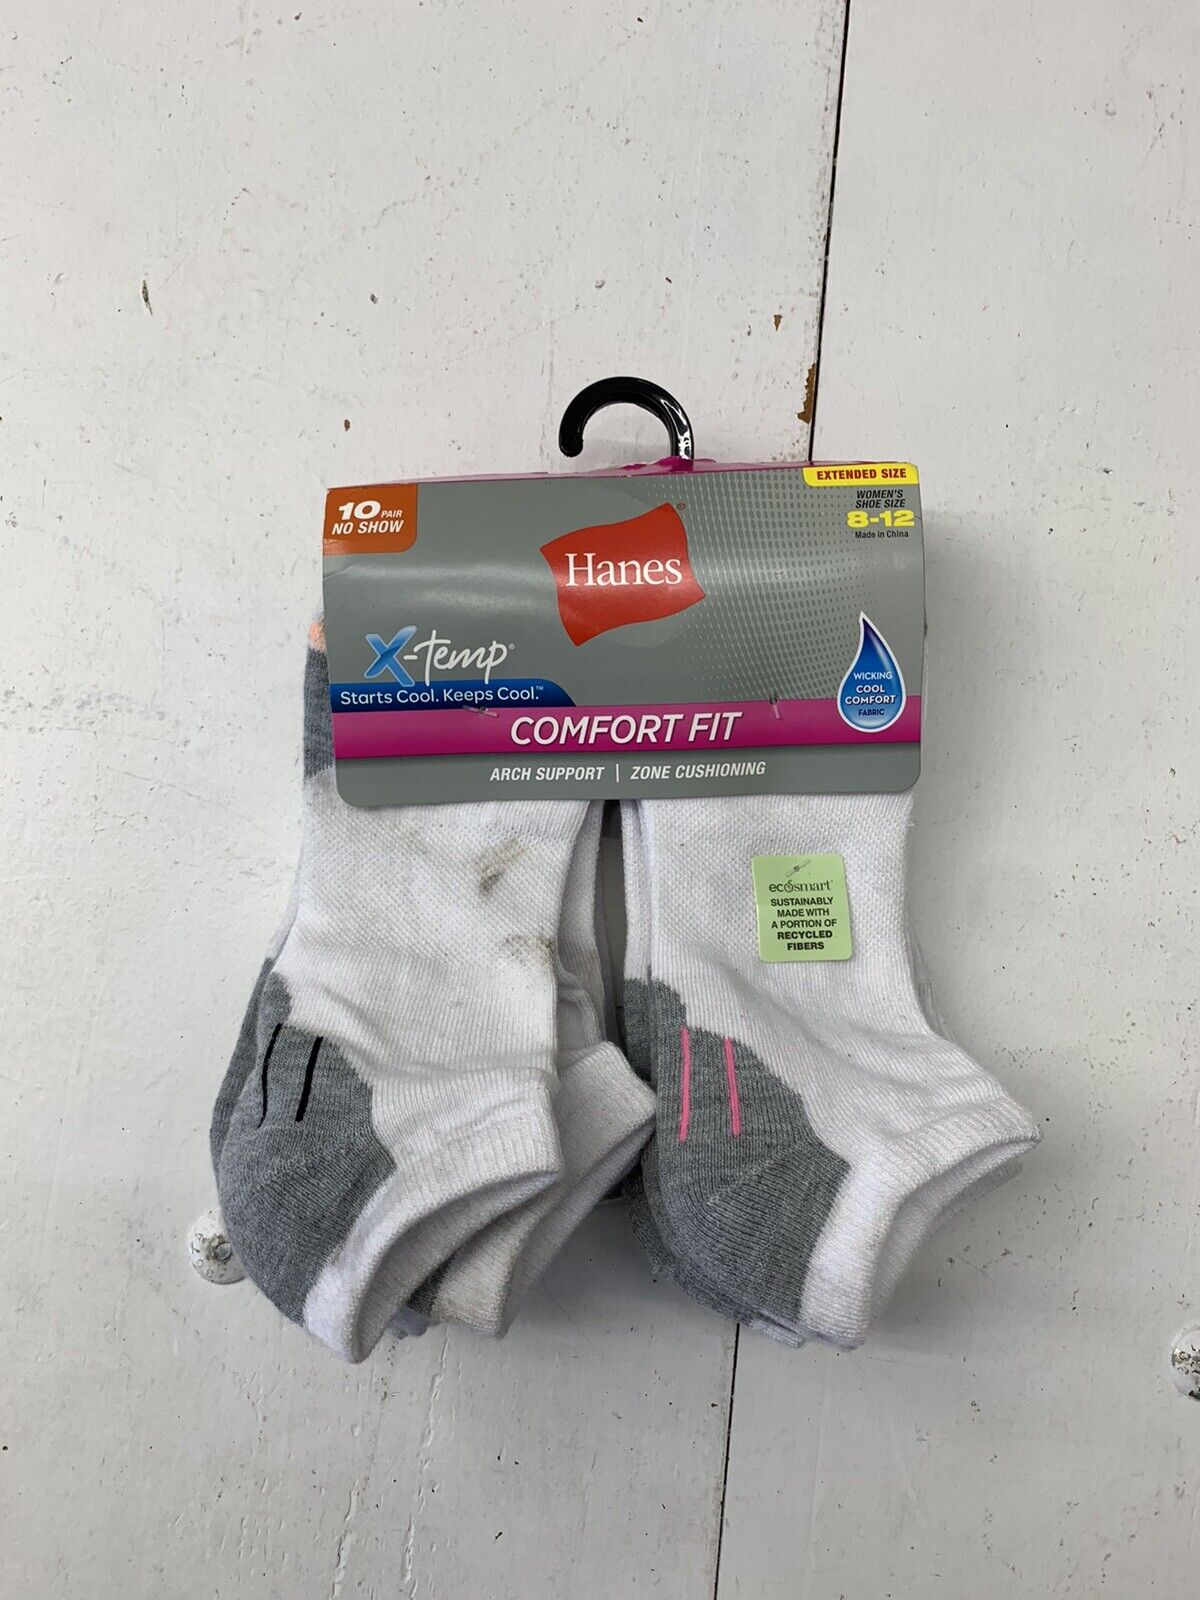 Hanes Womens X Temp Comfort Fit 10 Pack White No Show Socks Size 8-12